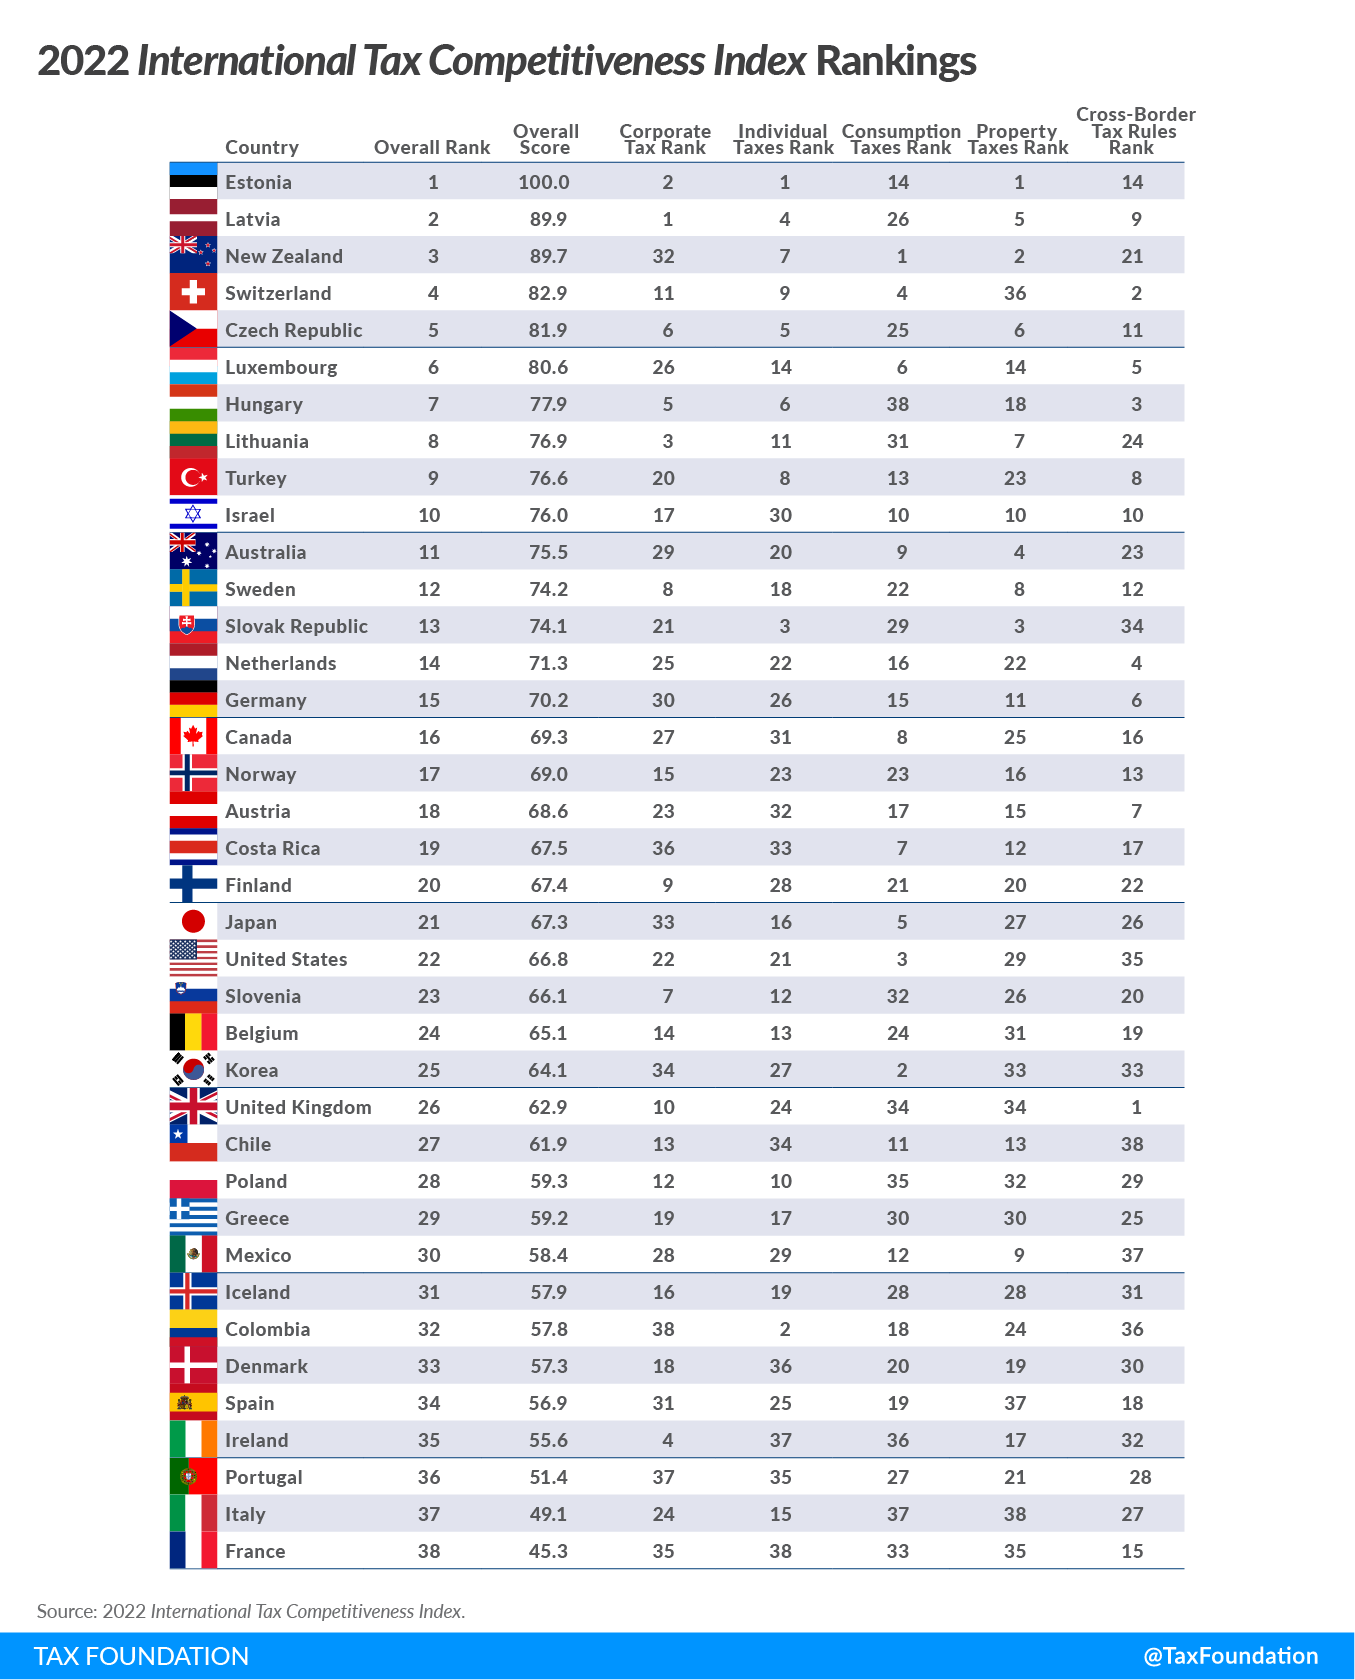 Hungarian Tax System in OECD's Top 10 on Competitiveness